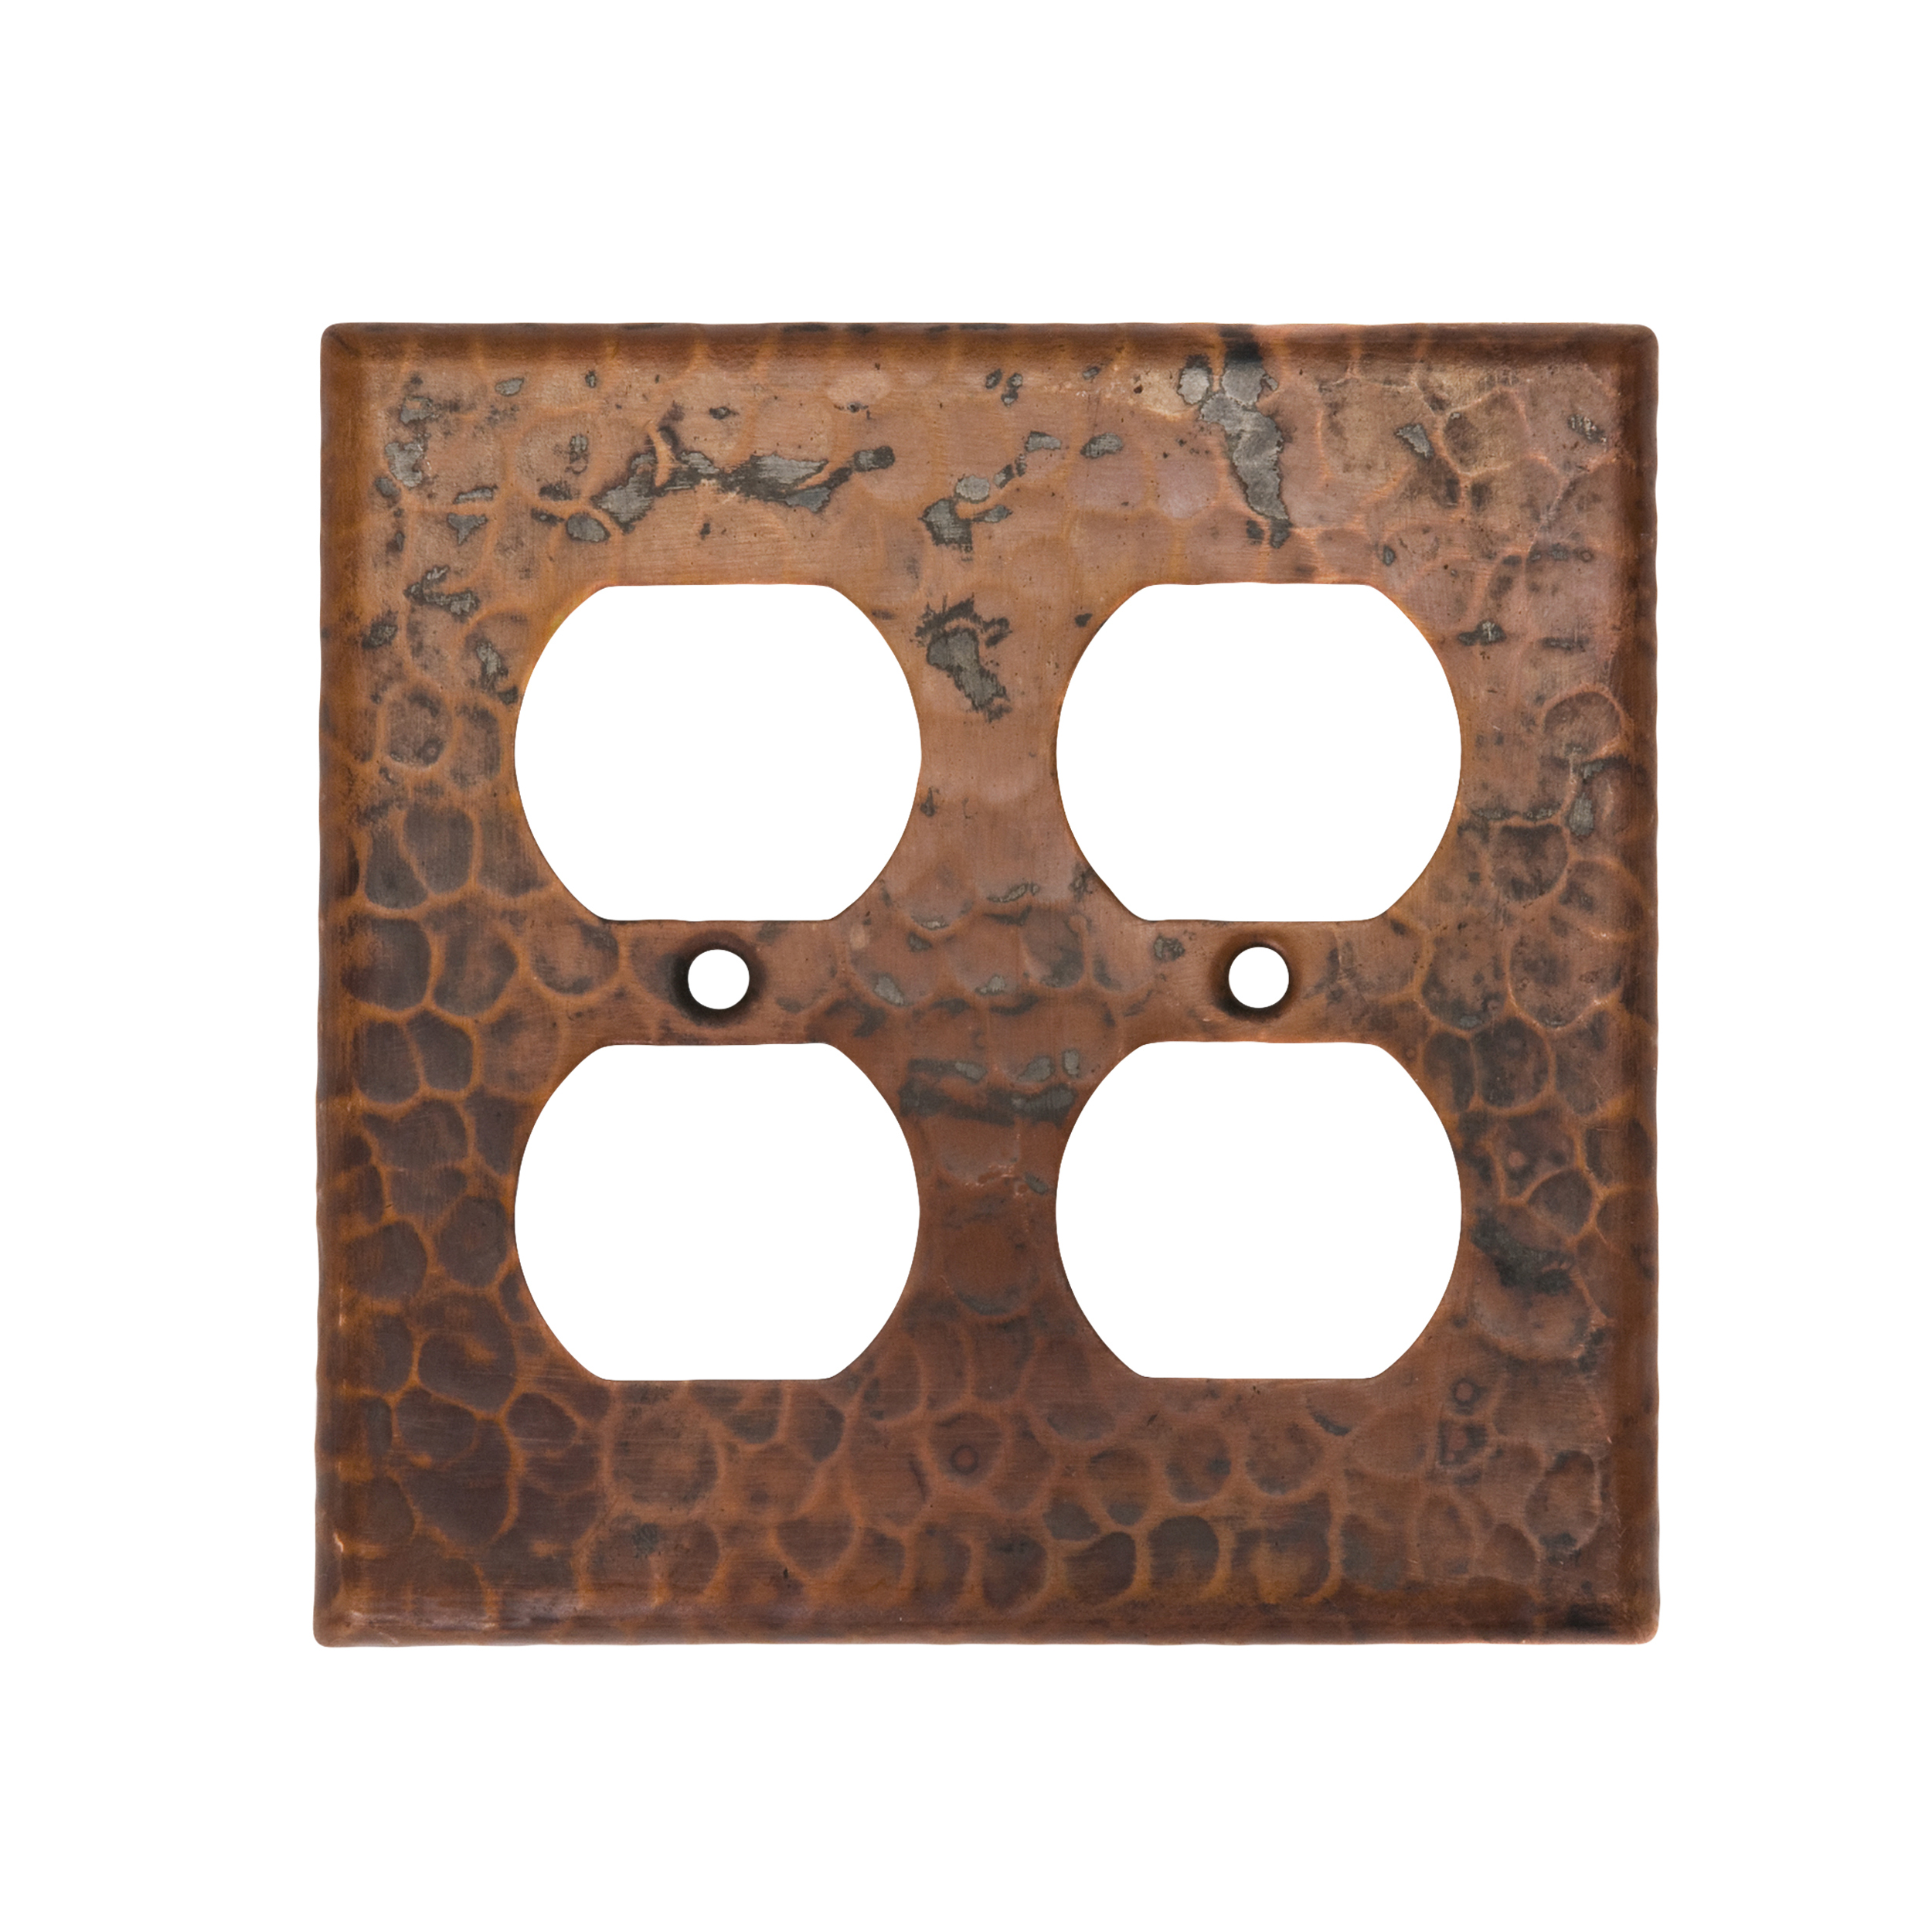 Double Duplex 4-hole Outlet Switchplate Cover